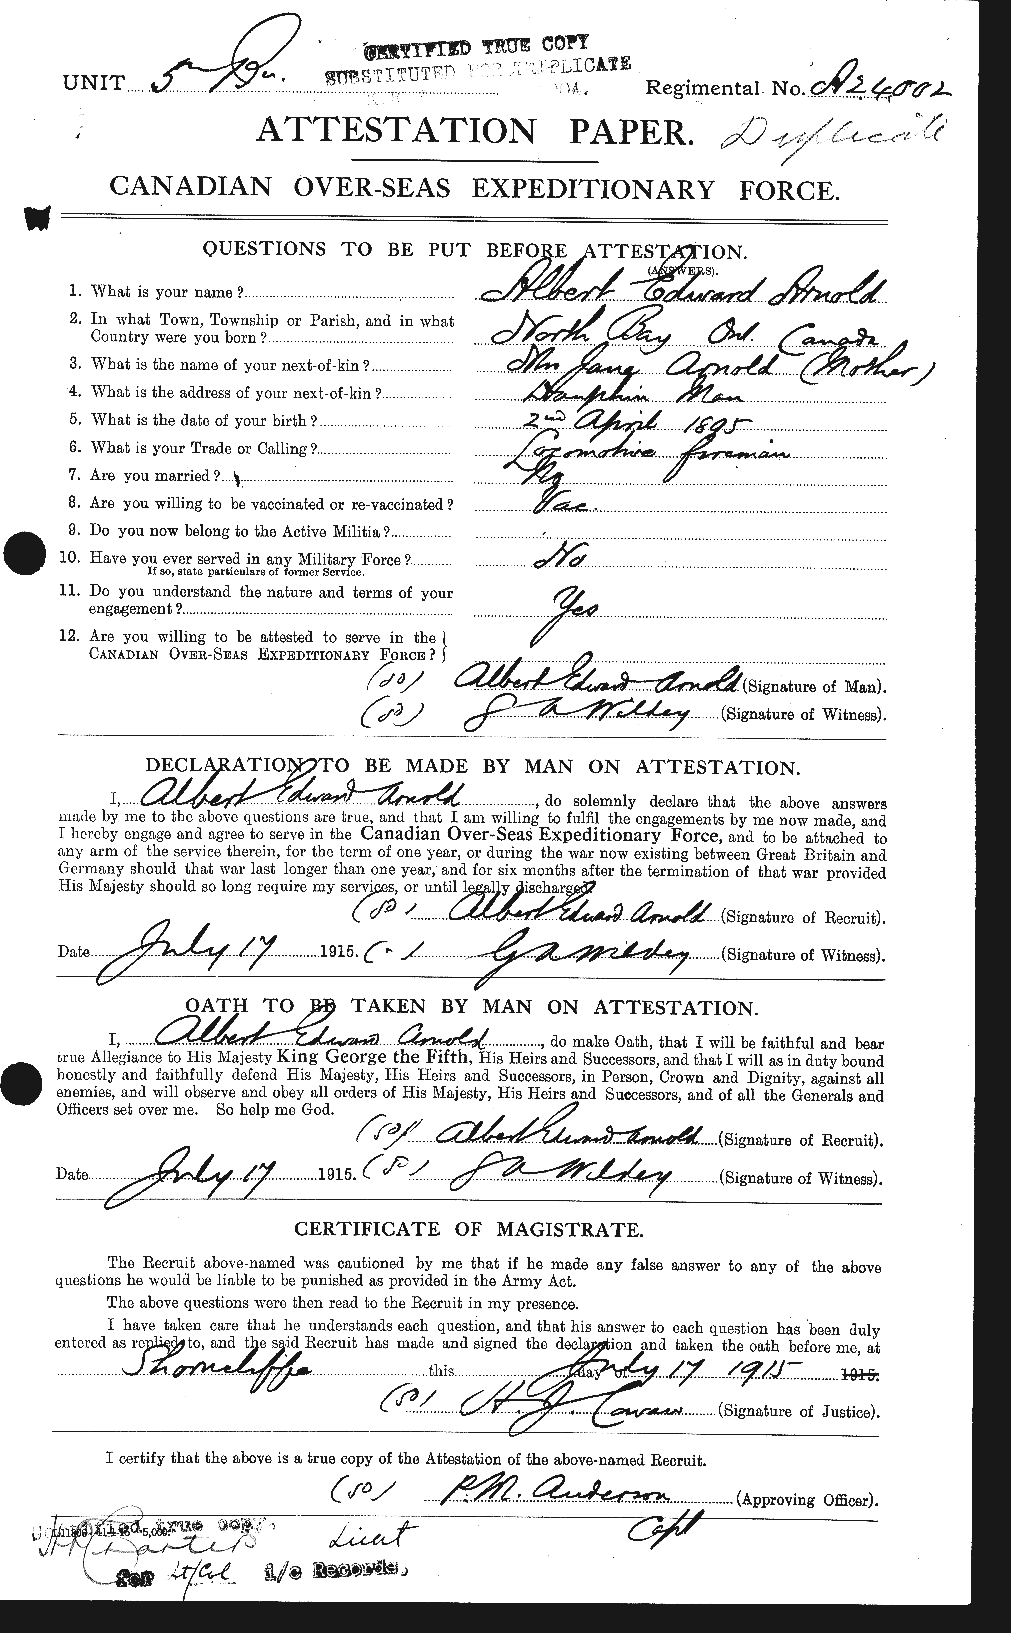 Personnel Records of the First World War - CEF 213186a